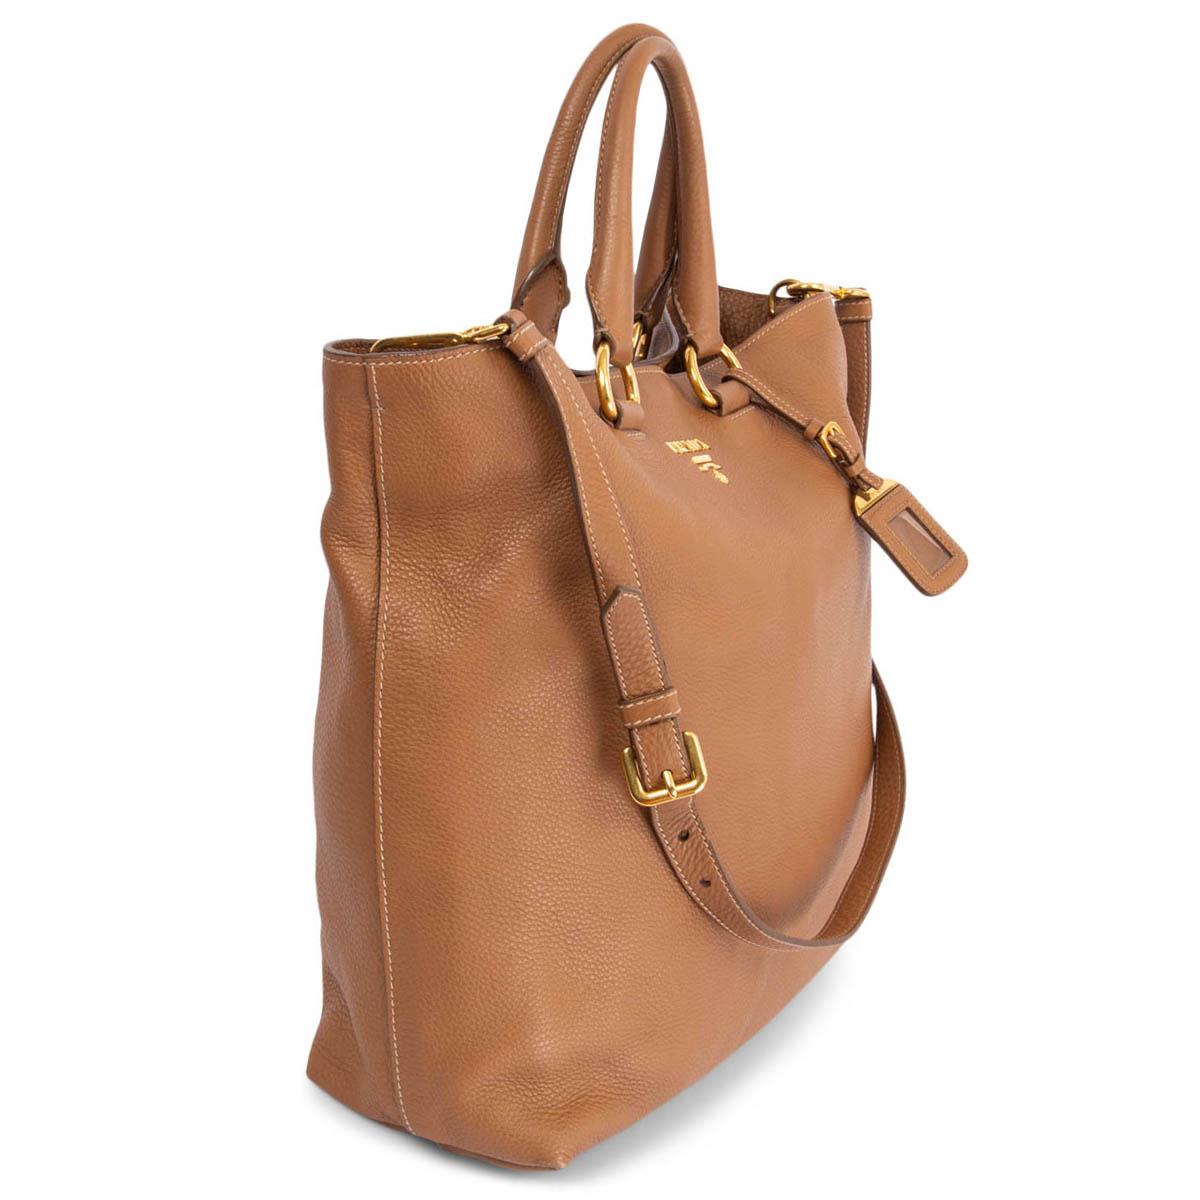 100% authentic Prada shopping tote bag in cognac grained leather featuring gold-tone hardware. Opens with a push-button on top and is lined dark brown logo nylon with one big zipper pocket against the back and a big open pocket against the front.